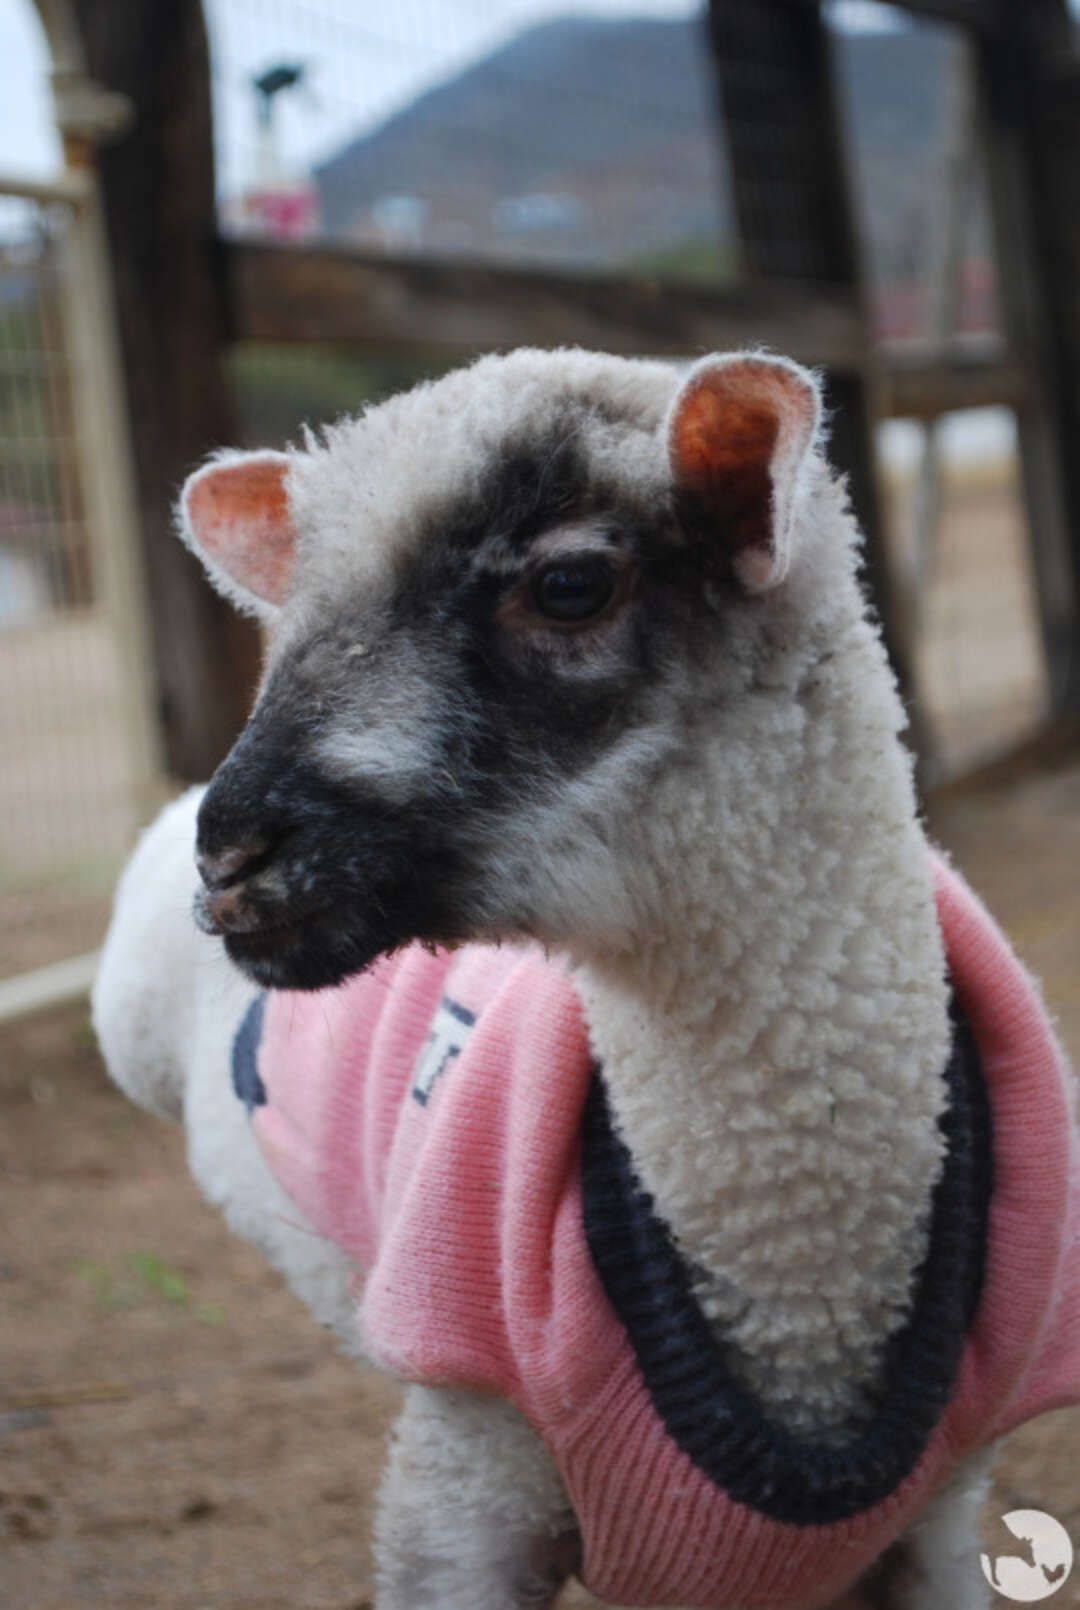 Baby Lamb Who Lost Her Leg Loves To Run And Jump Now - The Dodo